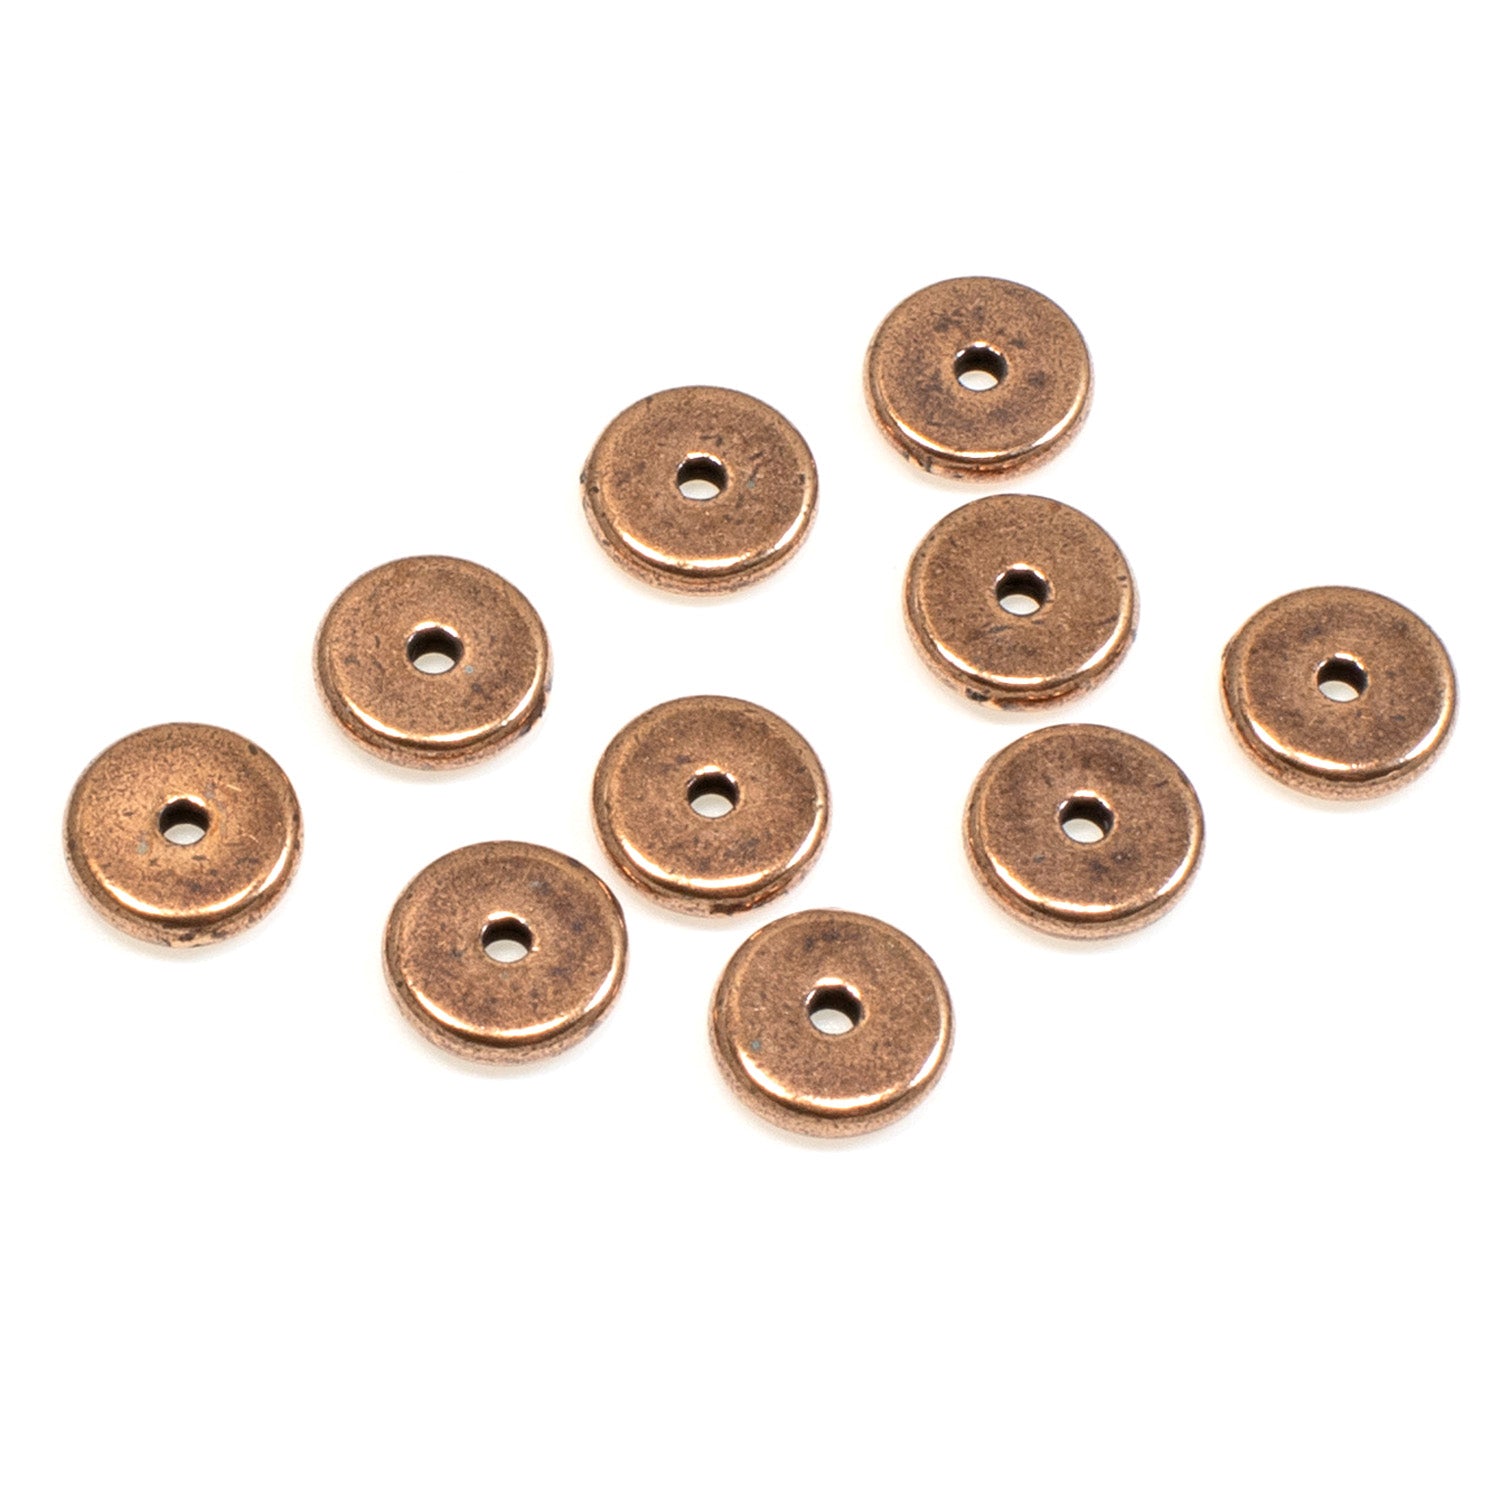 Copper Bali Beads, Solid Copper Beads, Copper Spacer Beads, Oxidized copper  Bead